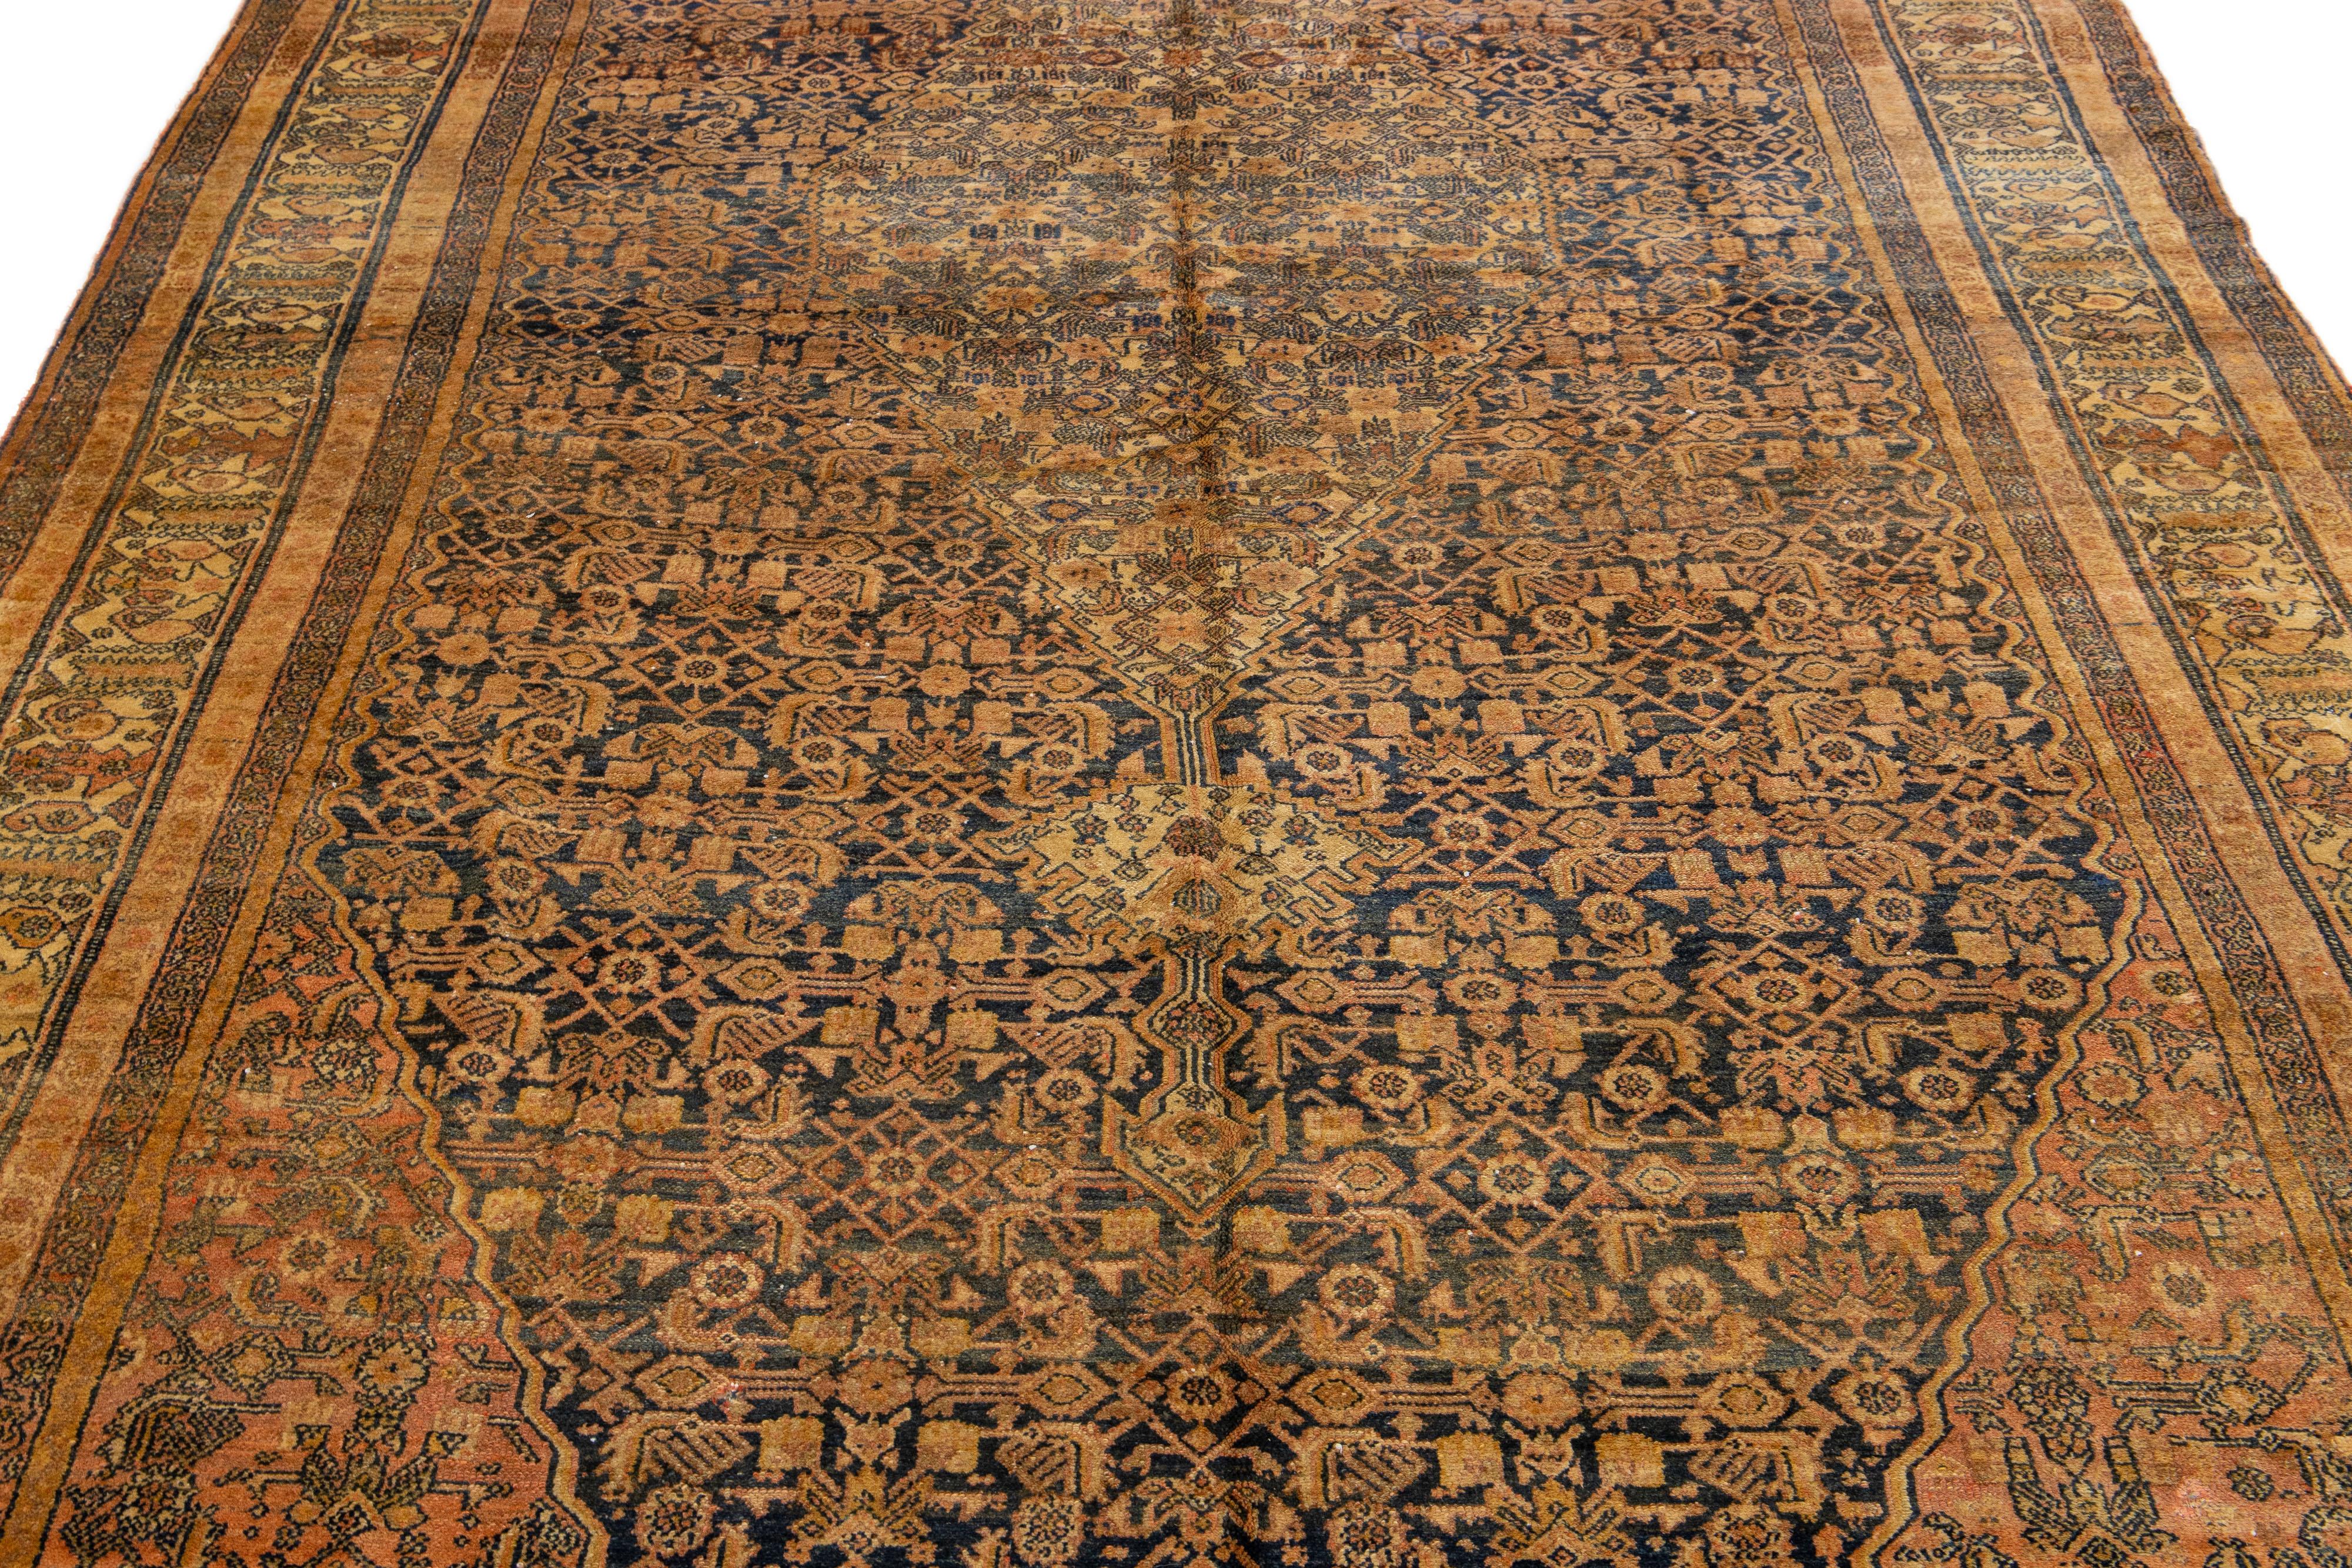 This stunning antique Persian Malayer rug is fashioned from meticulously hand-knotted wool, featuring a serene gray field adorned with tan accents in an exquisite all-over classic design.

This rug measures 7'2